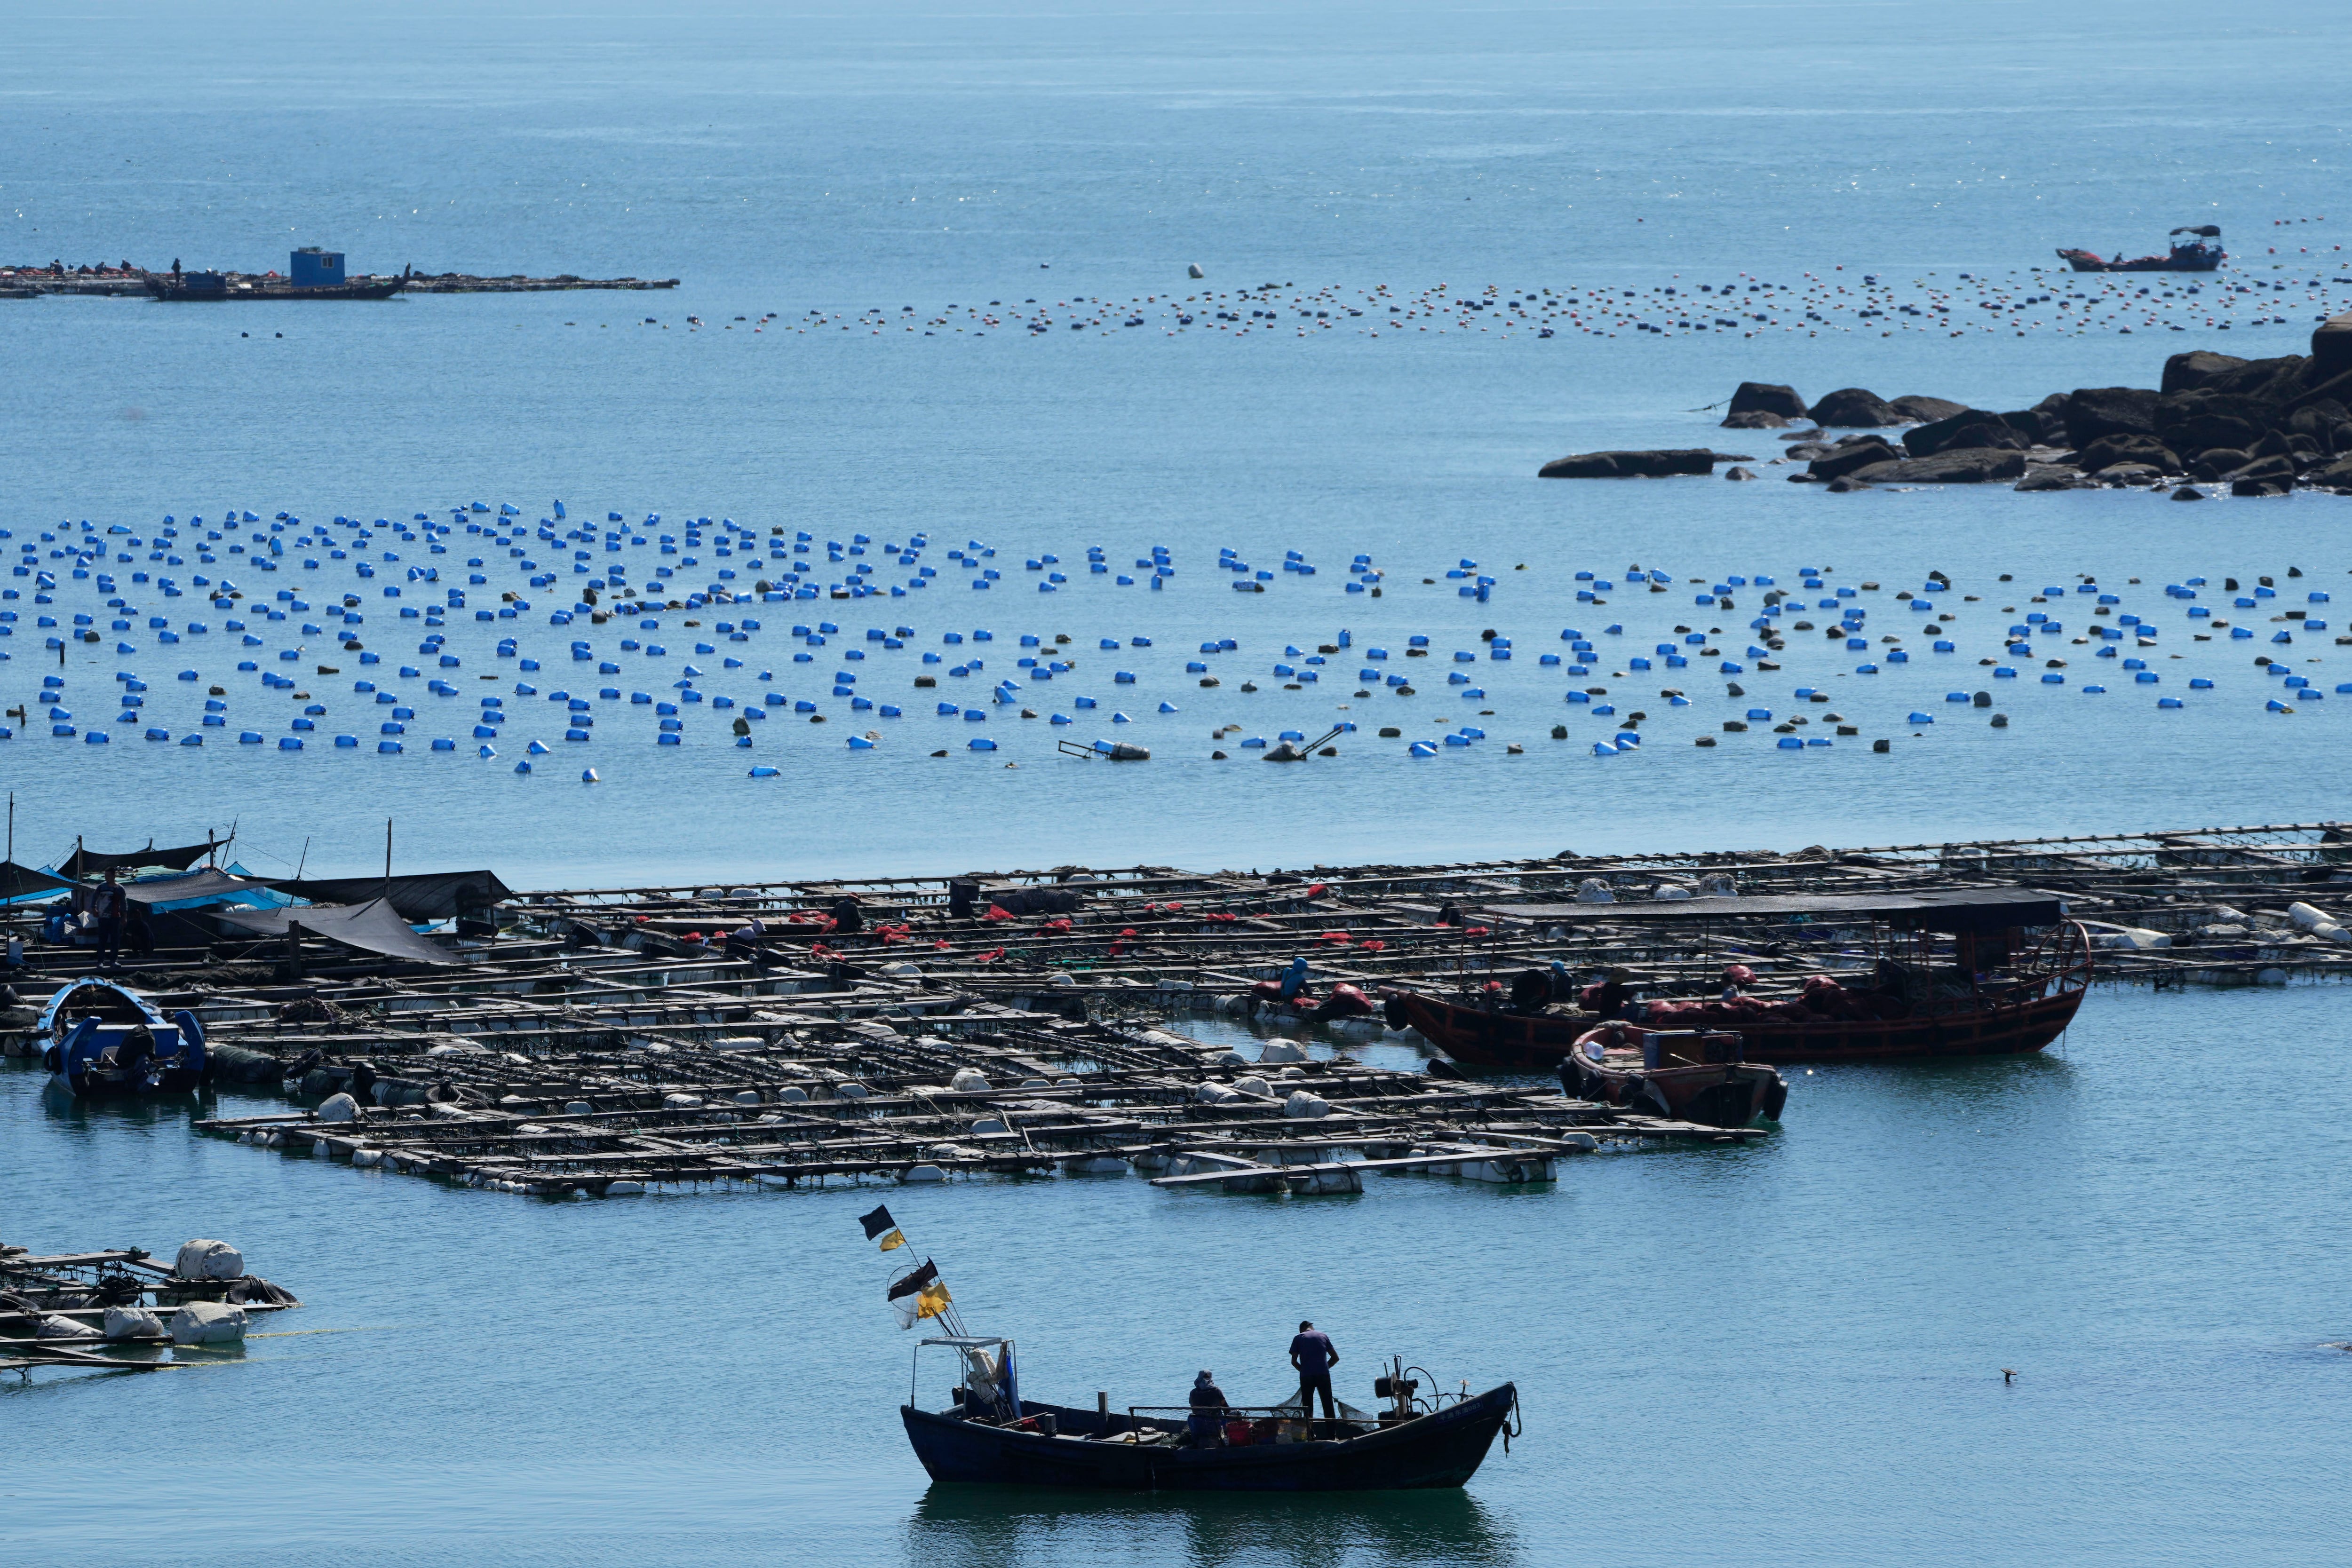 A boat moves through the water at the 68-nautical-mile scenic spot, the closest point in mainland China to the island of Taiwan, in Pingtan in southeastern China's Fujian Province, Friday, Aug. 5, 2022. (AP Photo/Ng Han Guan)